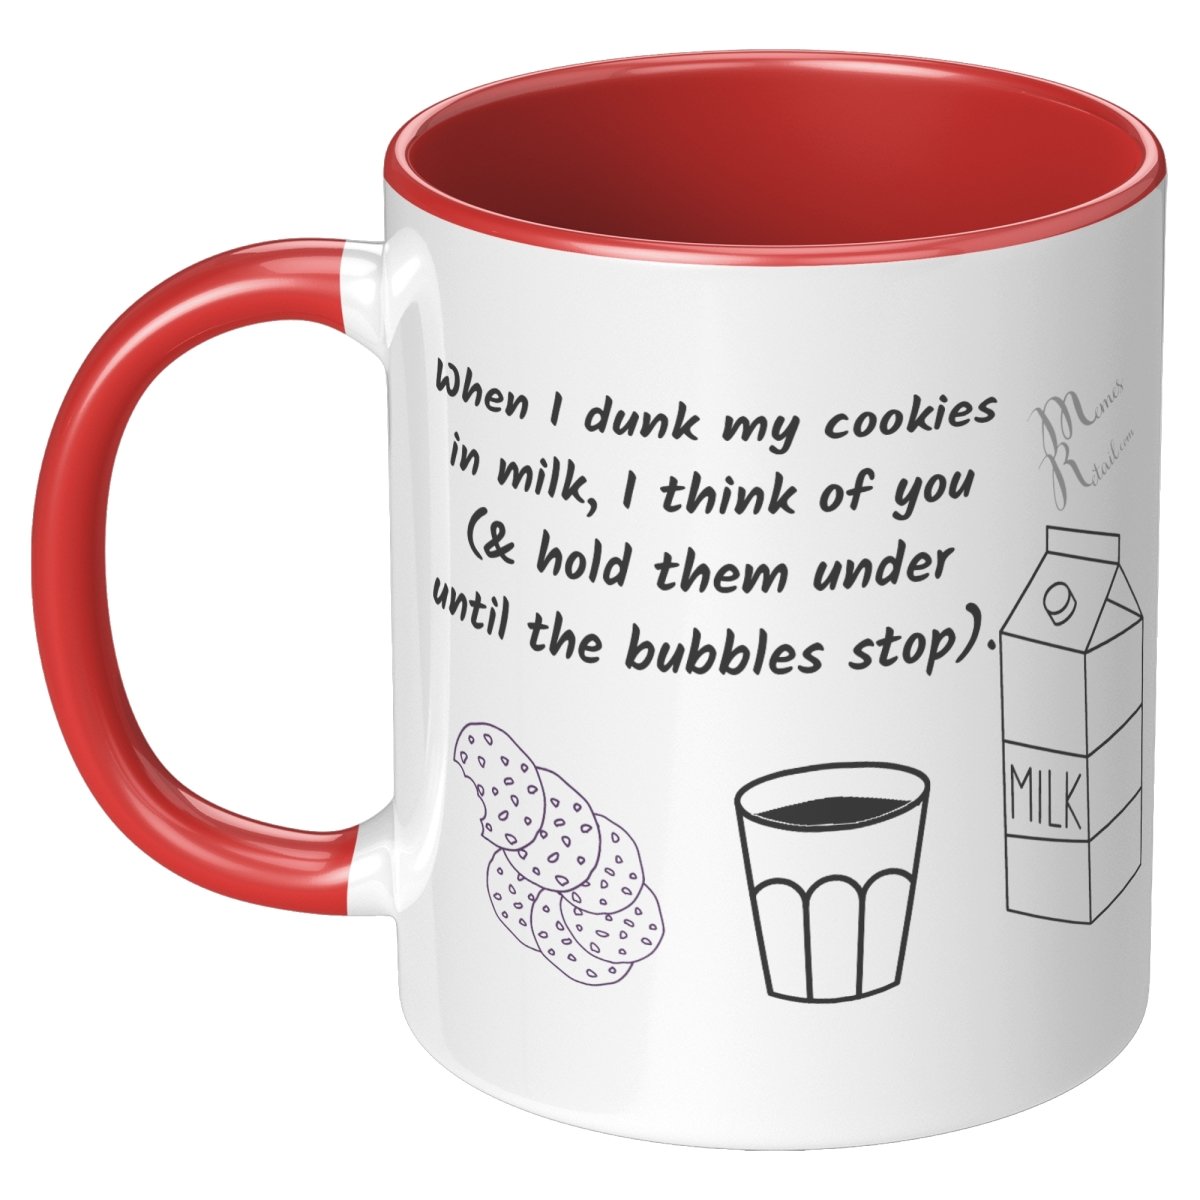 When I dunk My Cookies in Milk, I think of You - 11oz/15oz Mugs, 11oz / Red Accent - MemesRetail.com